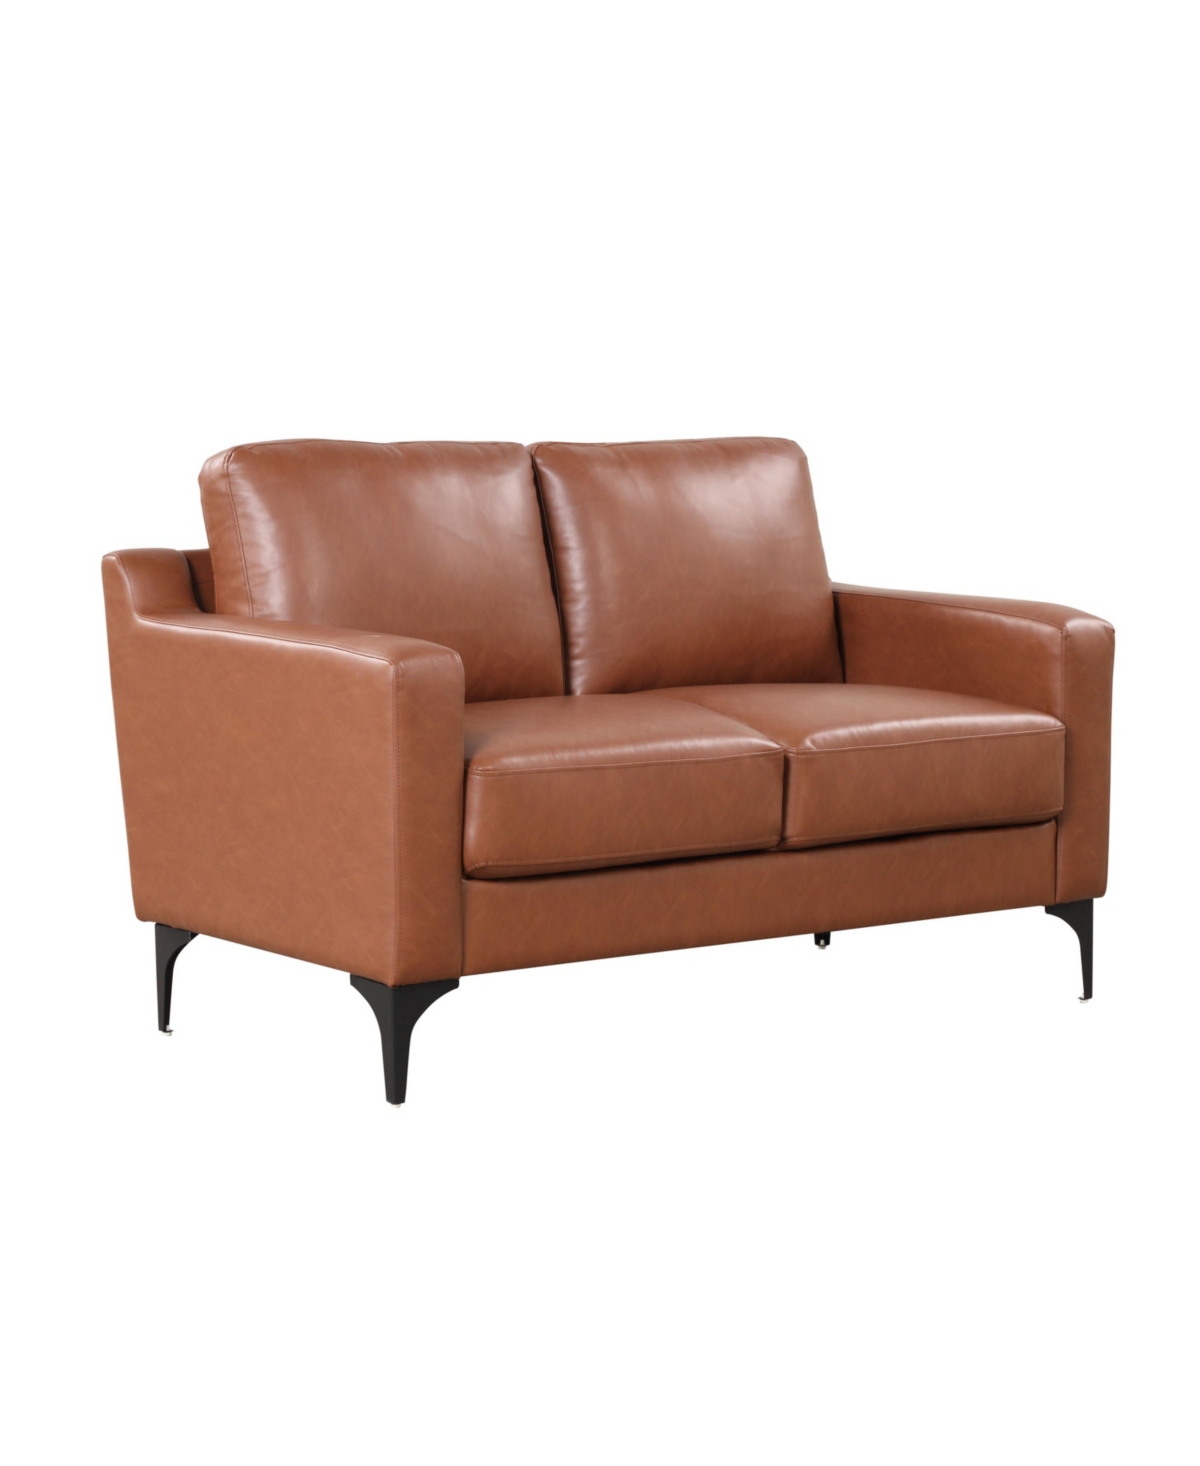 Serta 56" Faux Leather Francis Loveseat In Brown